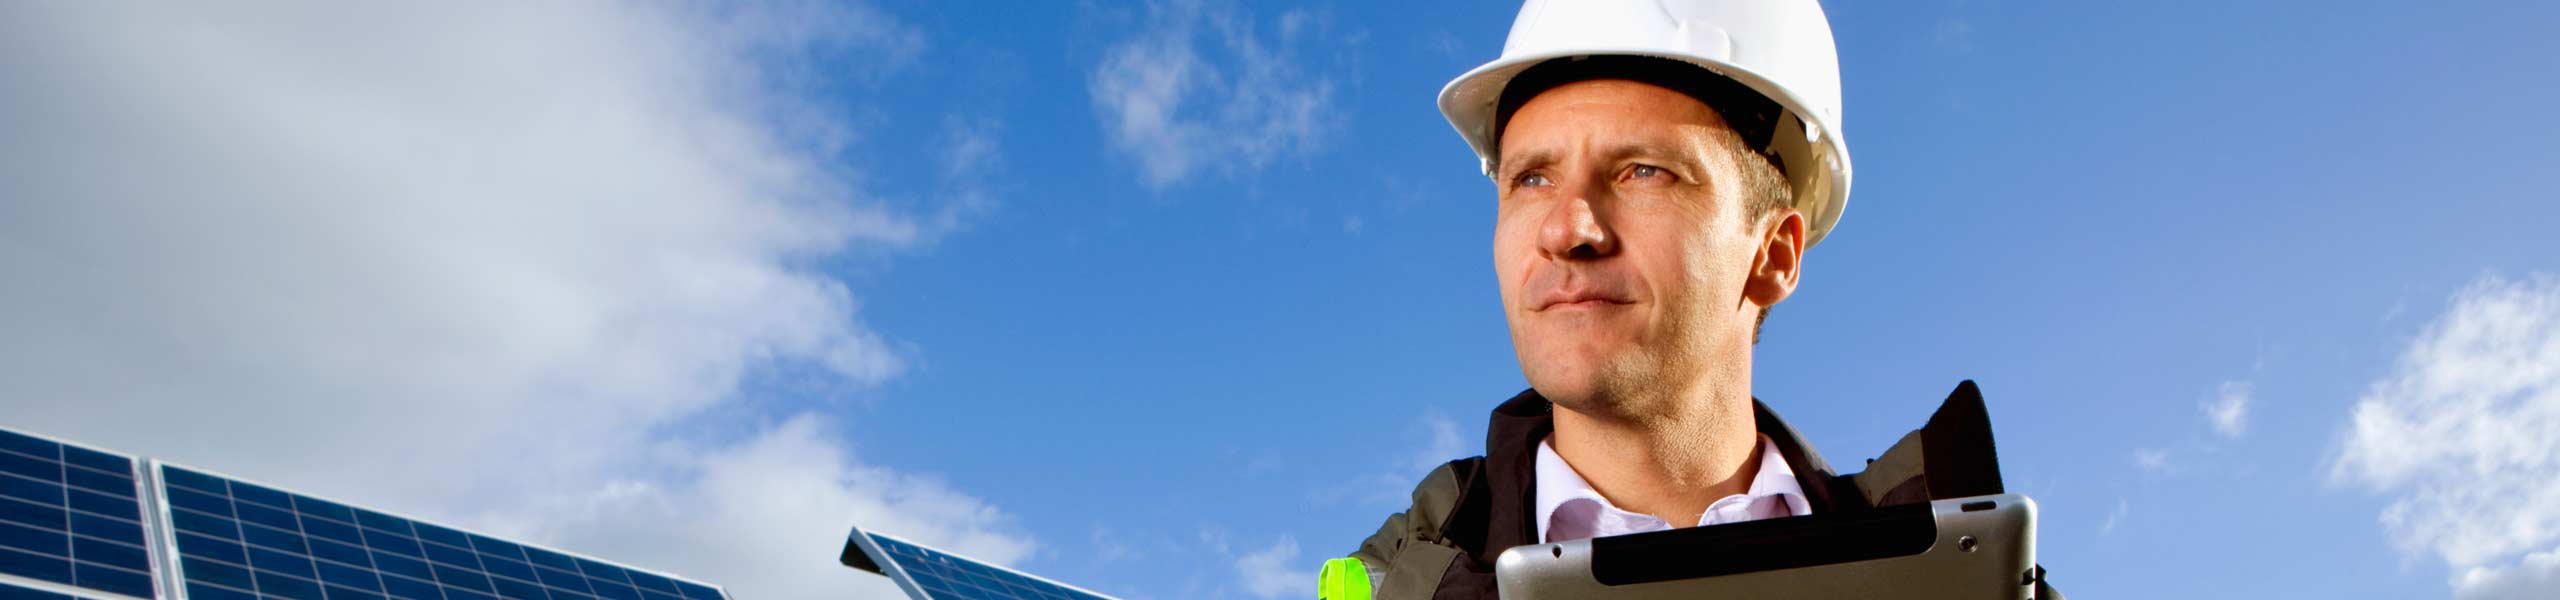 Engineer with digital tablet standing in front of solar panels, energy management.